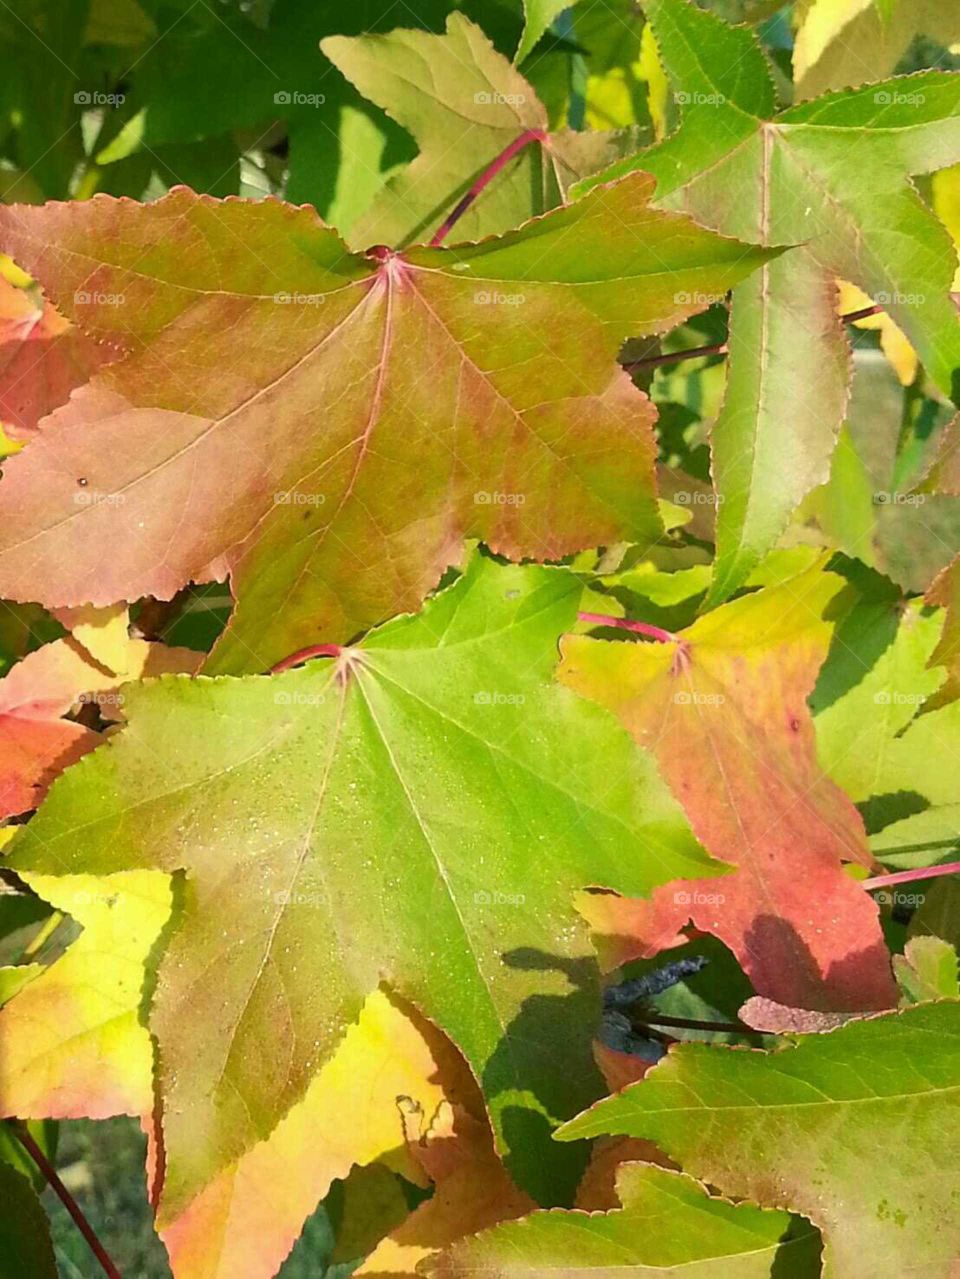 Closeuo of maple leaves changing color in early autumn.